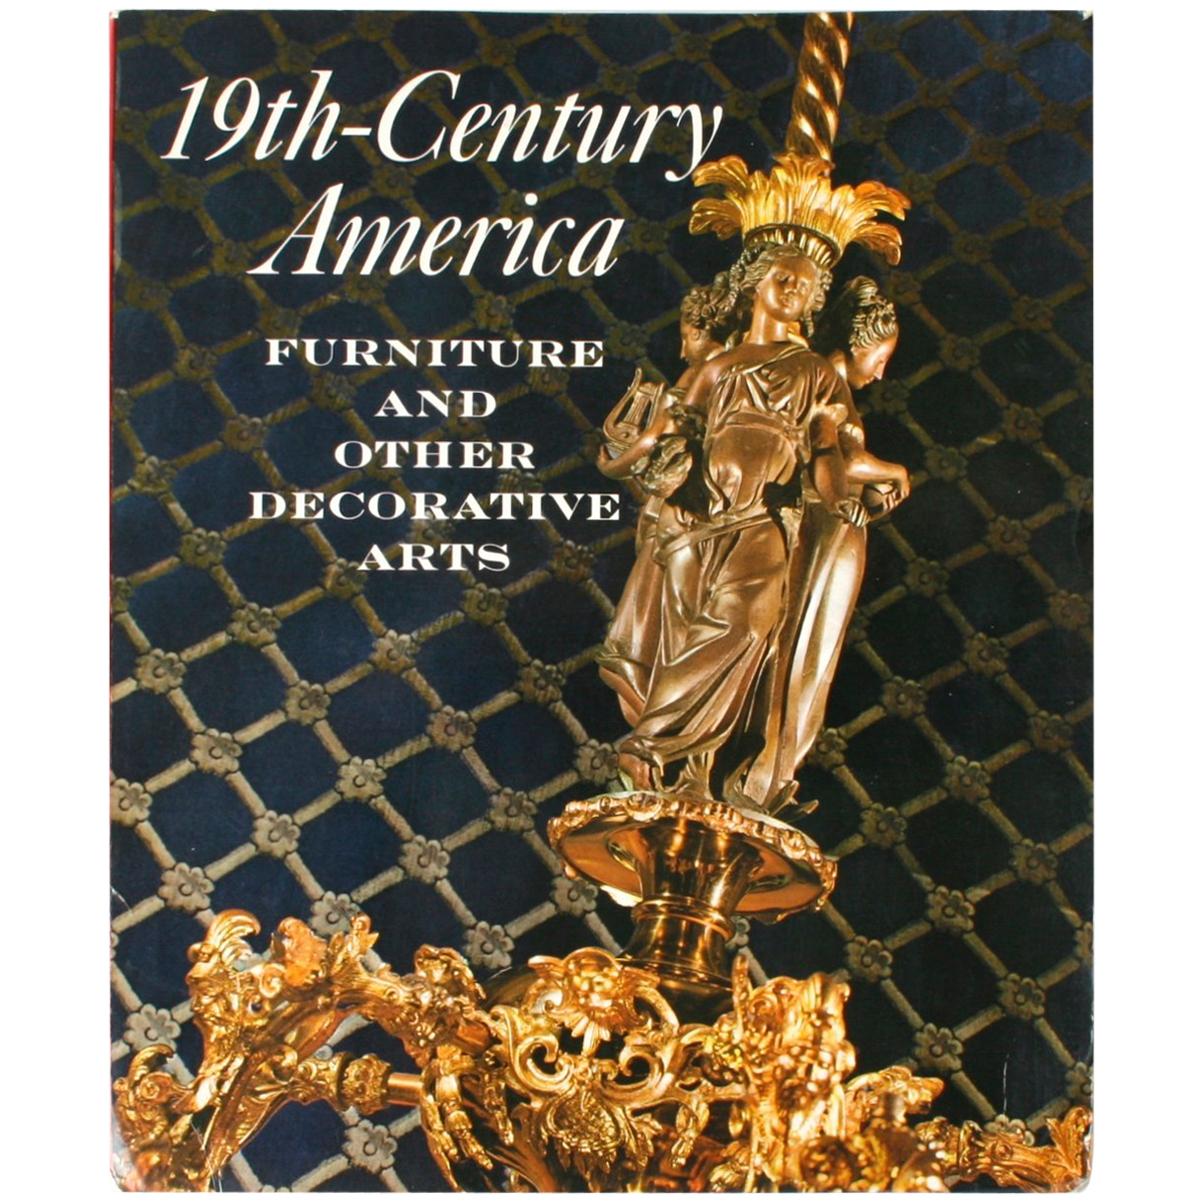 19th Century America Furniture and Other Decorative Arts by Marvin D. Schwartz For Sale